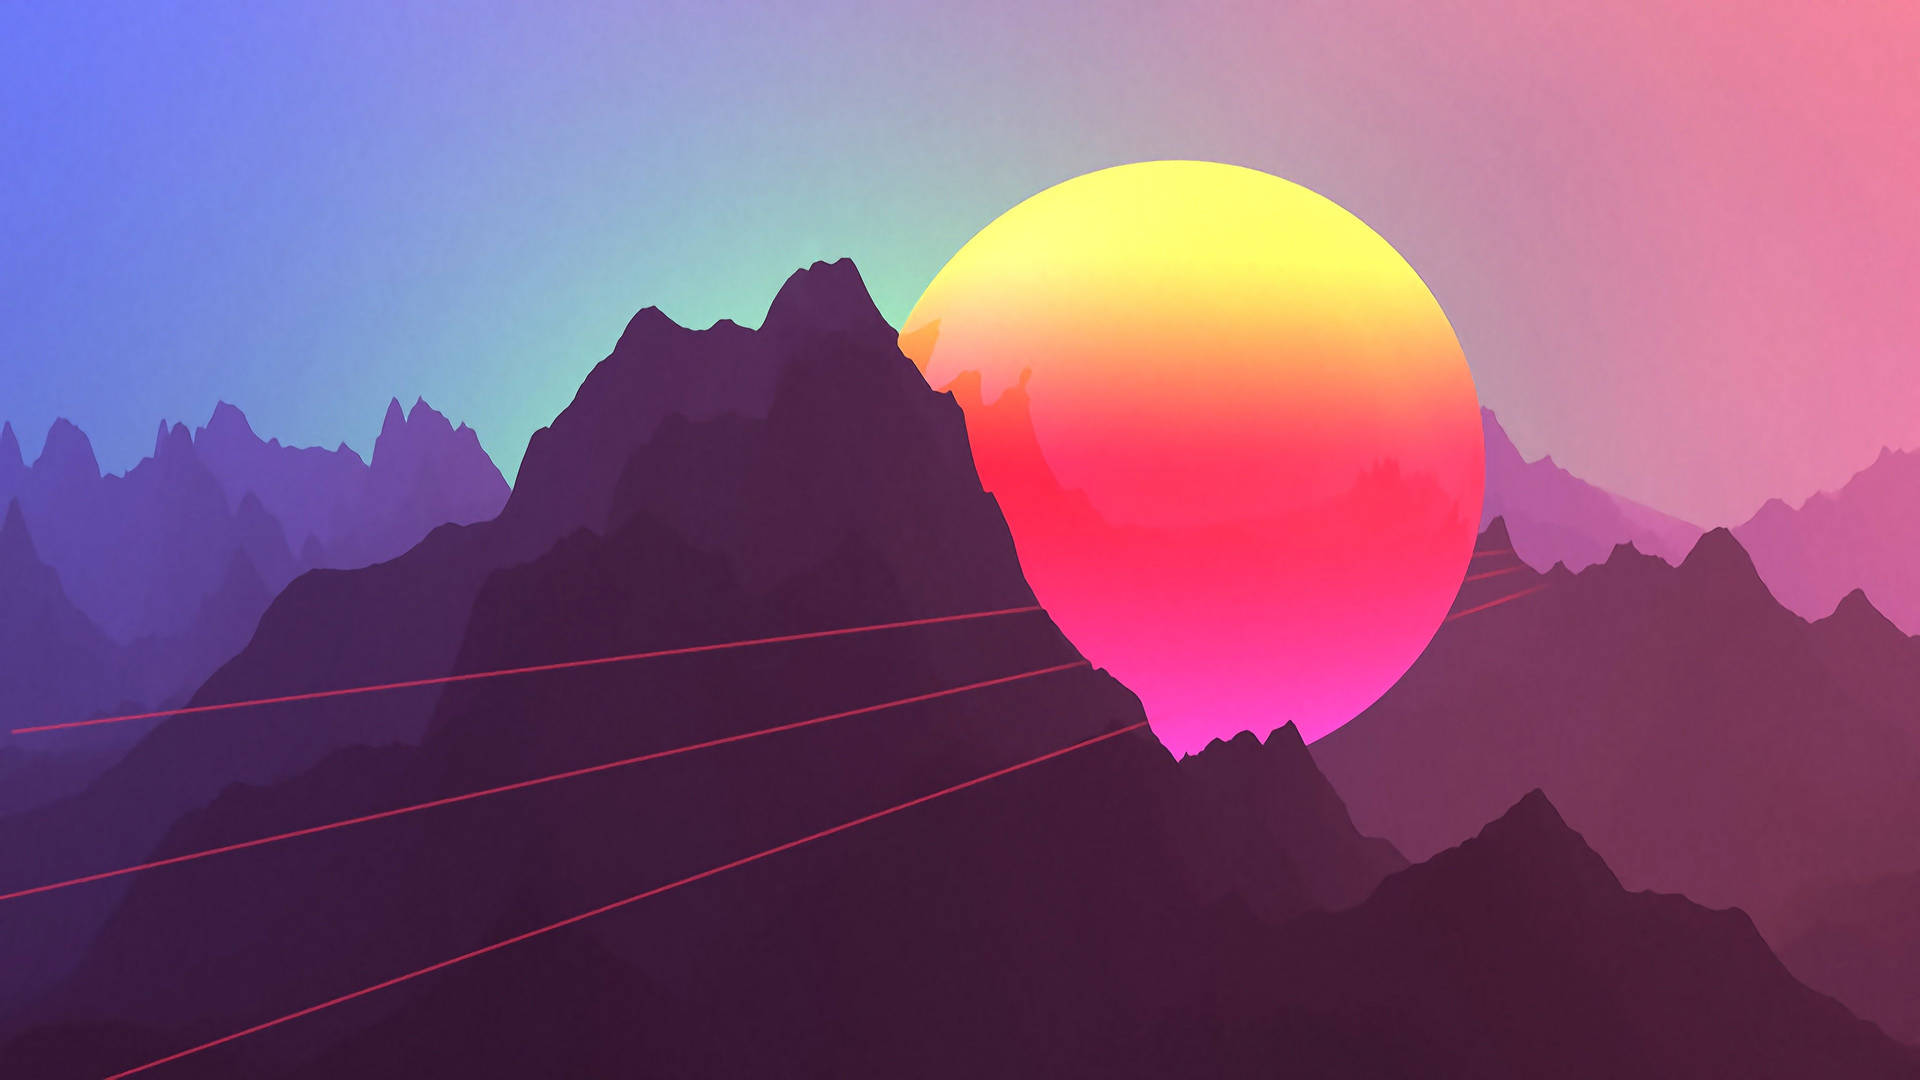 A Colorful Mountain With A Bright Sun In The Background Wallpaper